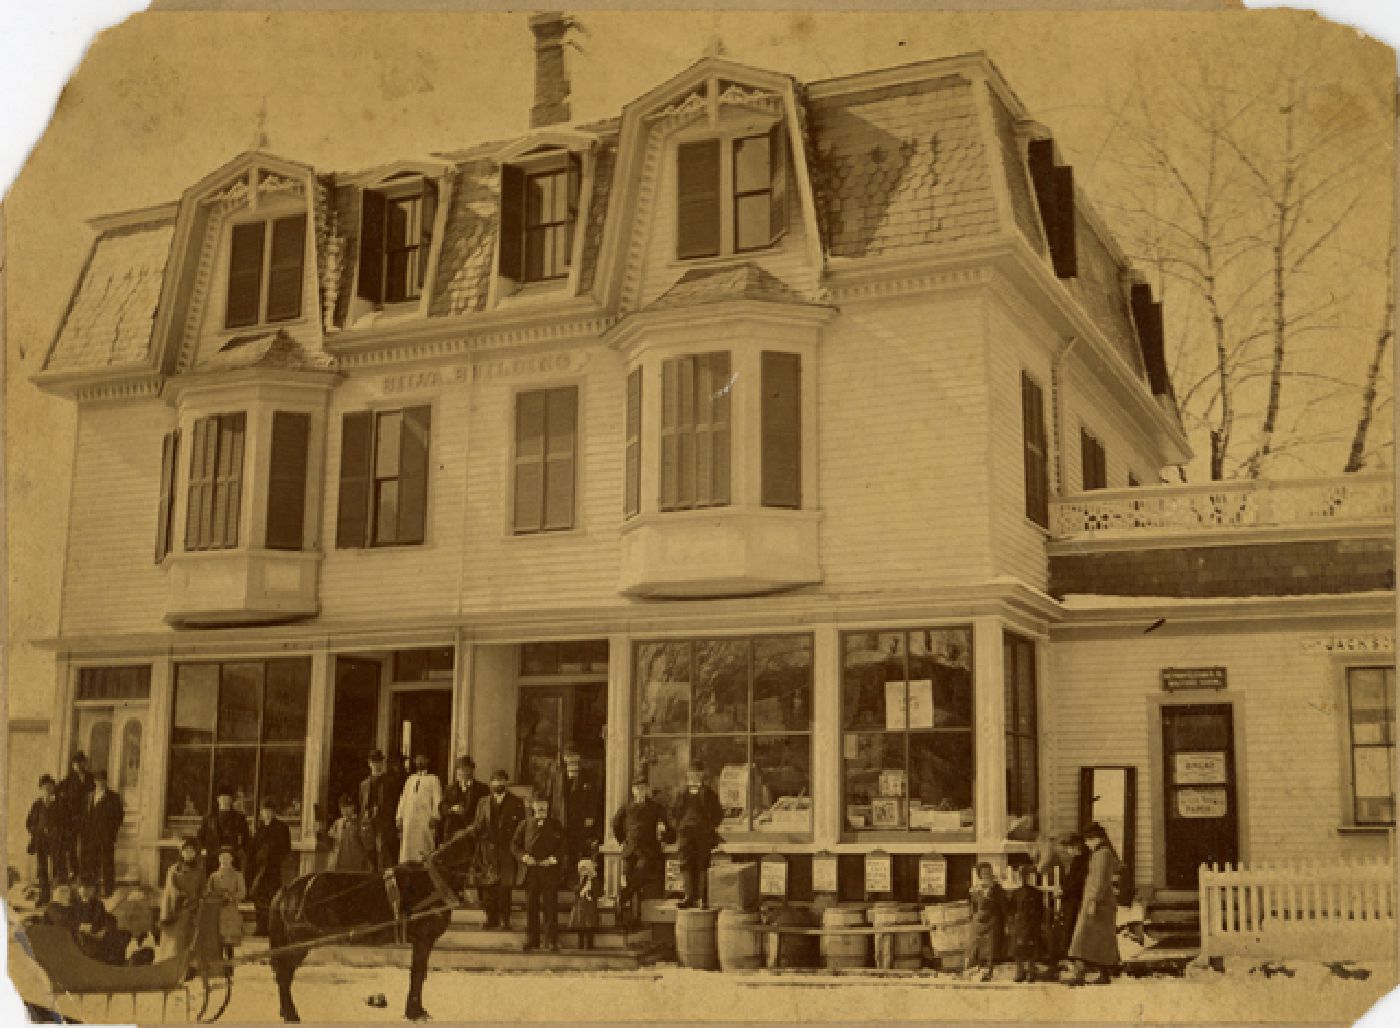 Store at south side of intersection of Fuller Street and Dorchester Avenue with sign: Silva Building